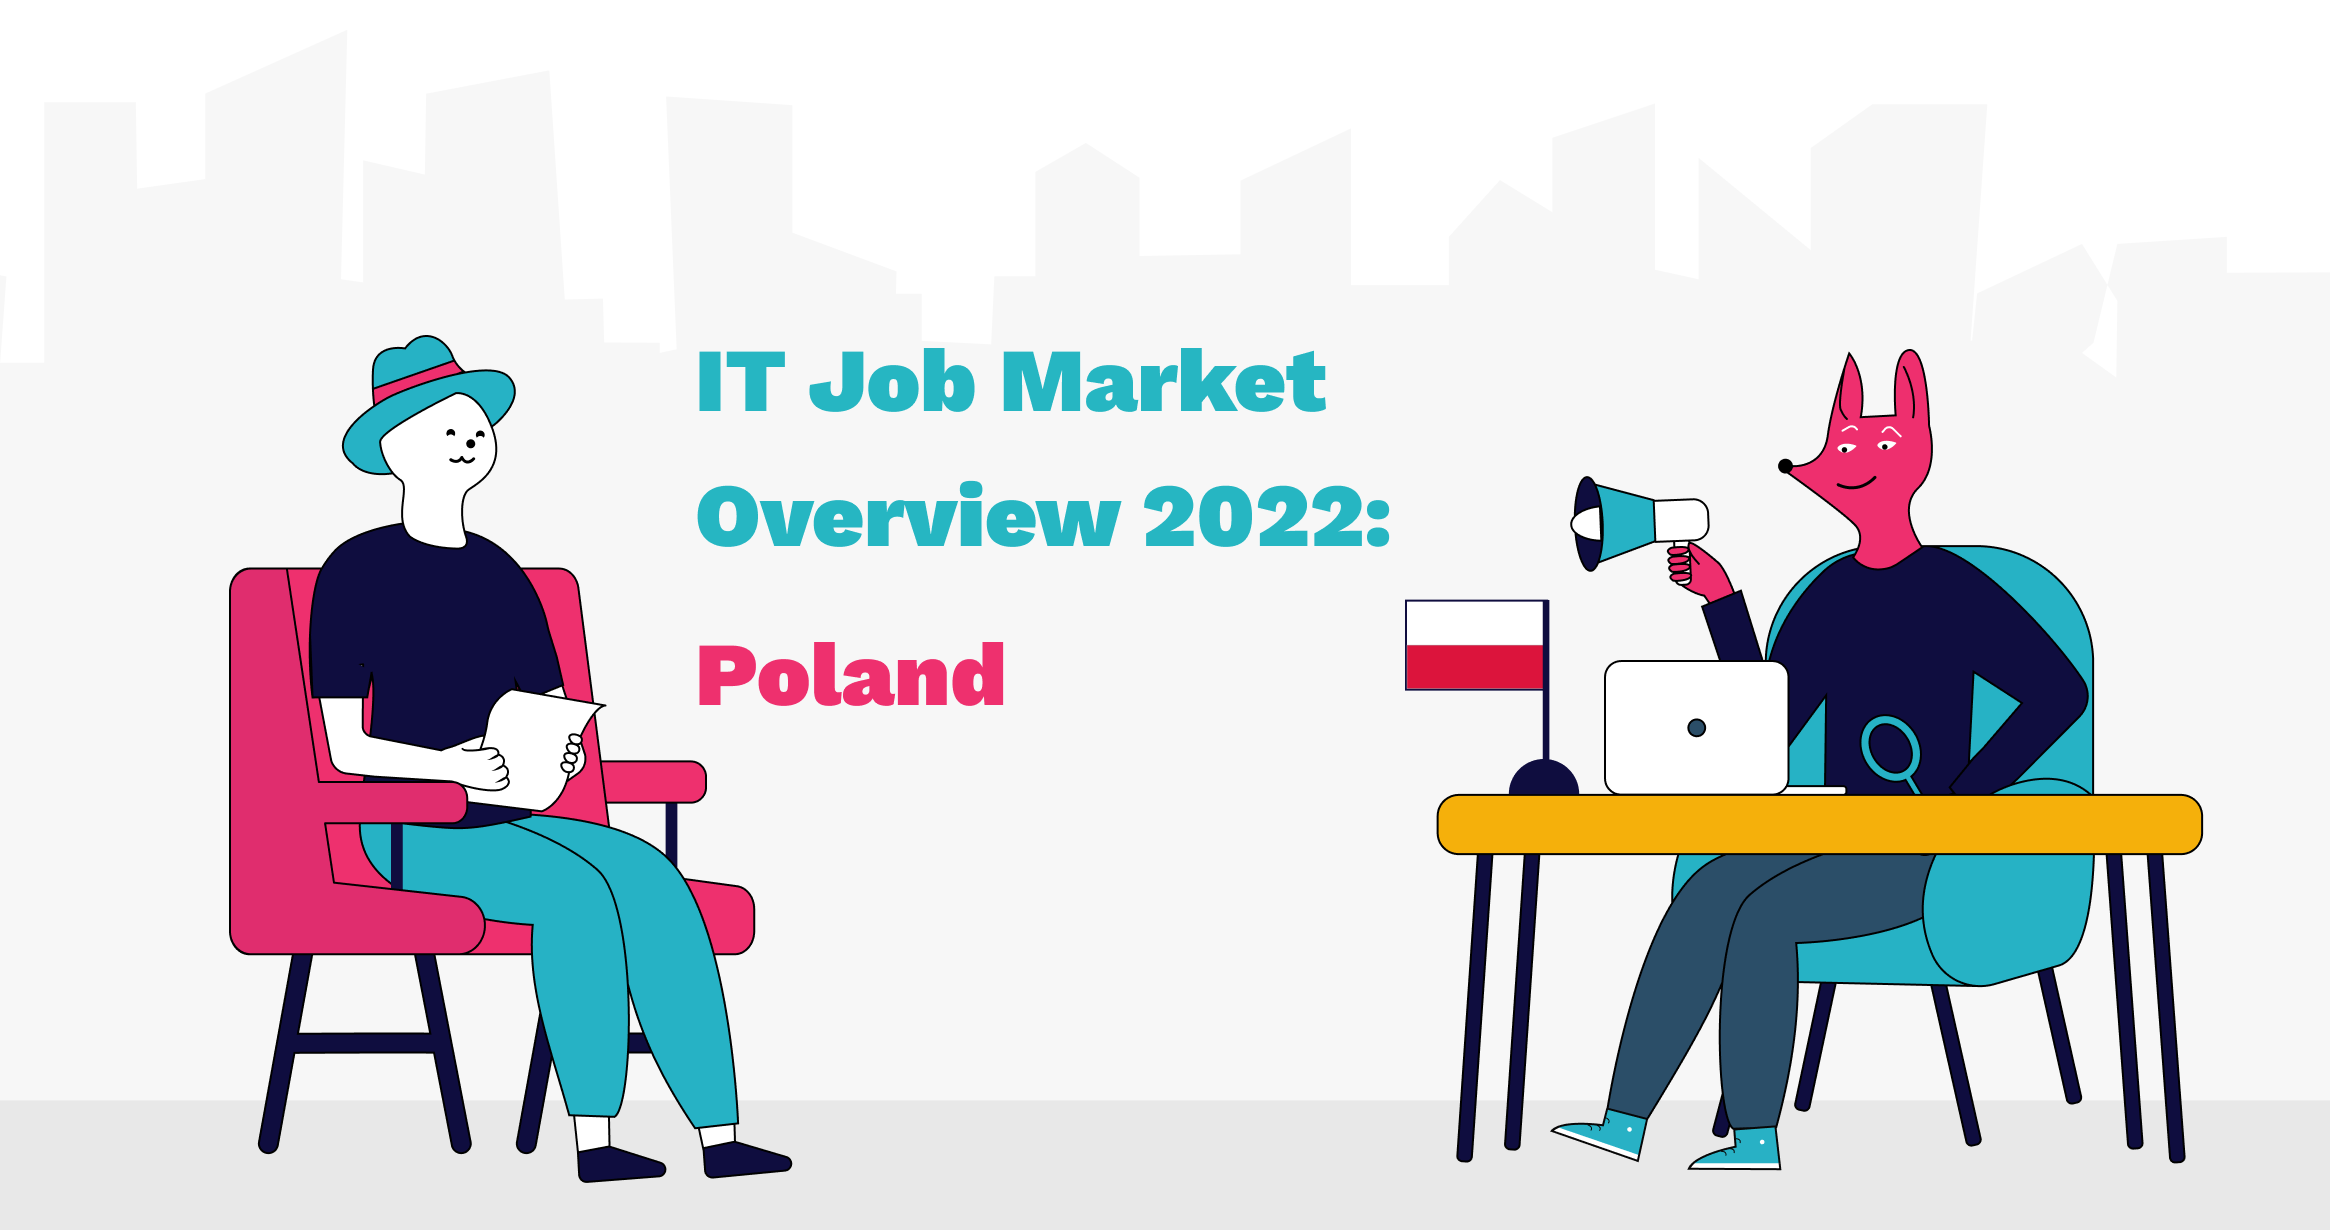 IT Job Market Overview in 2022: Poland